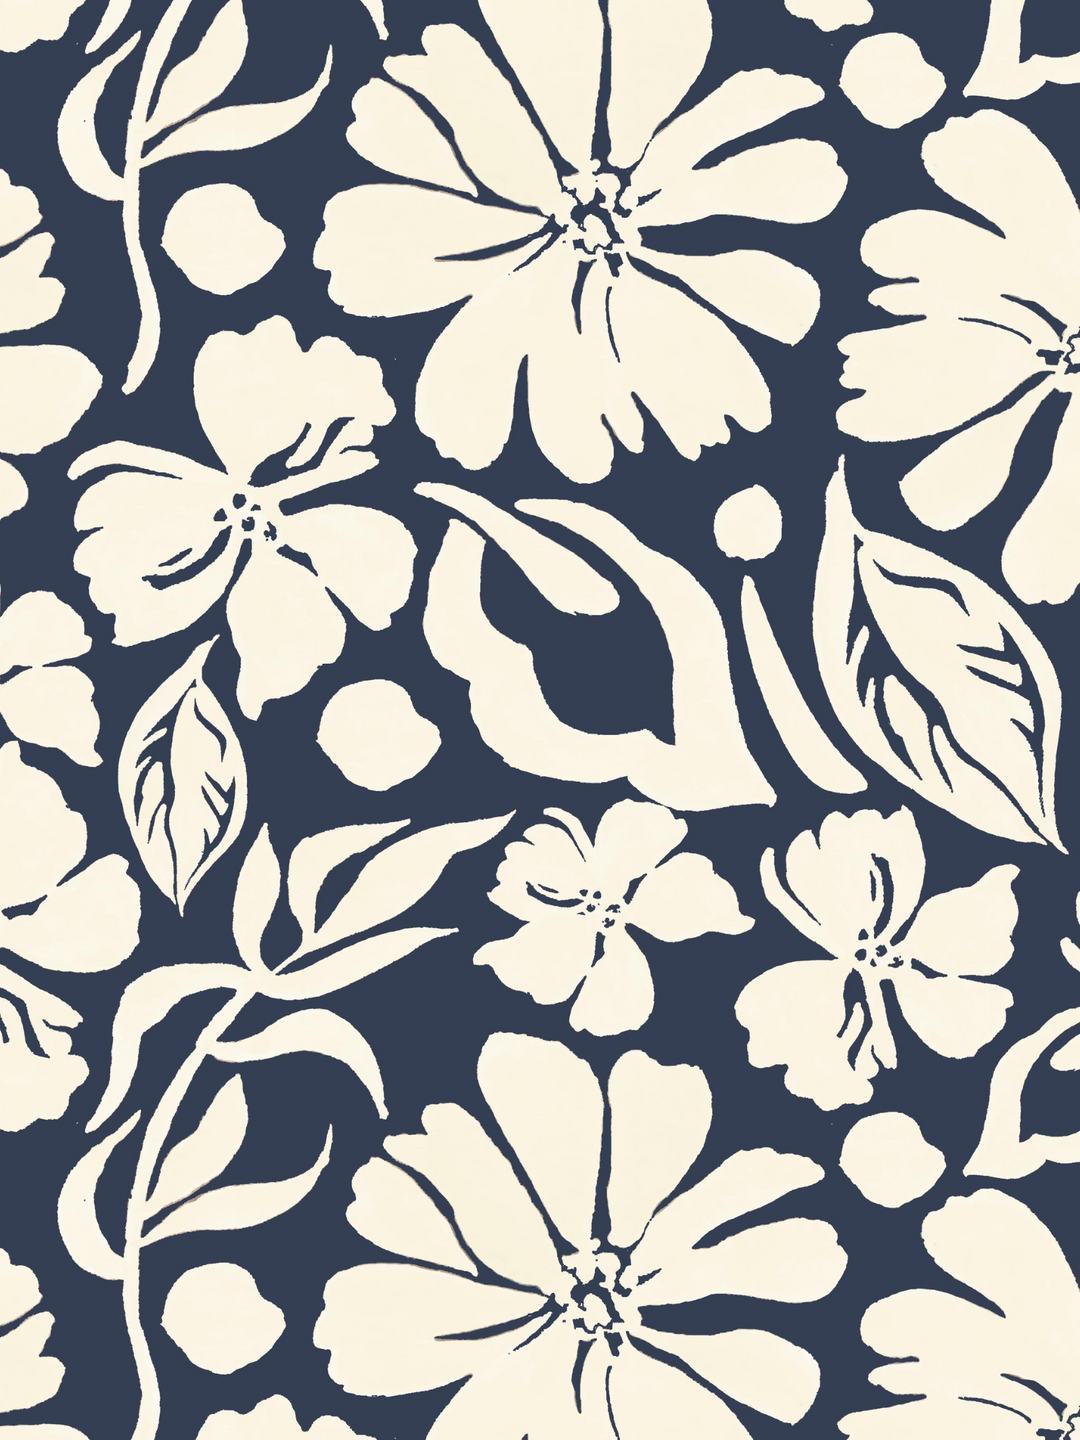 The Lily Top | Navy Flower Power